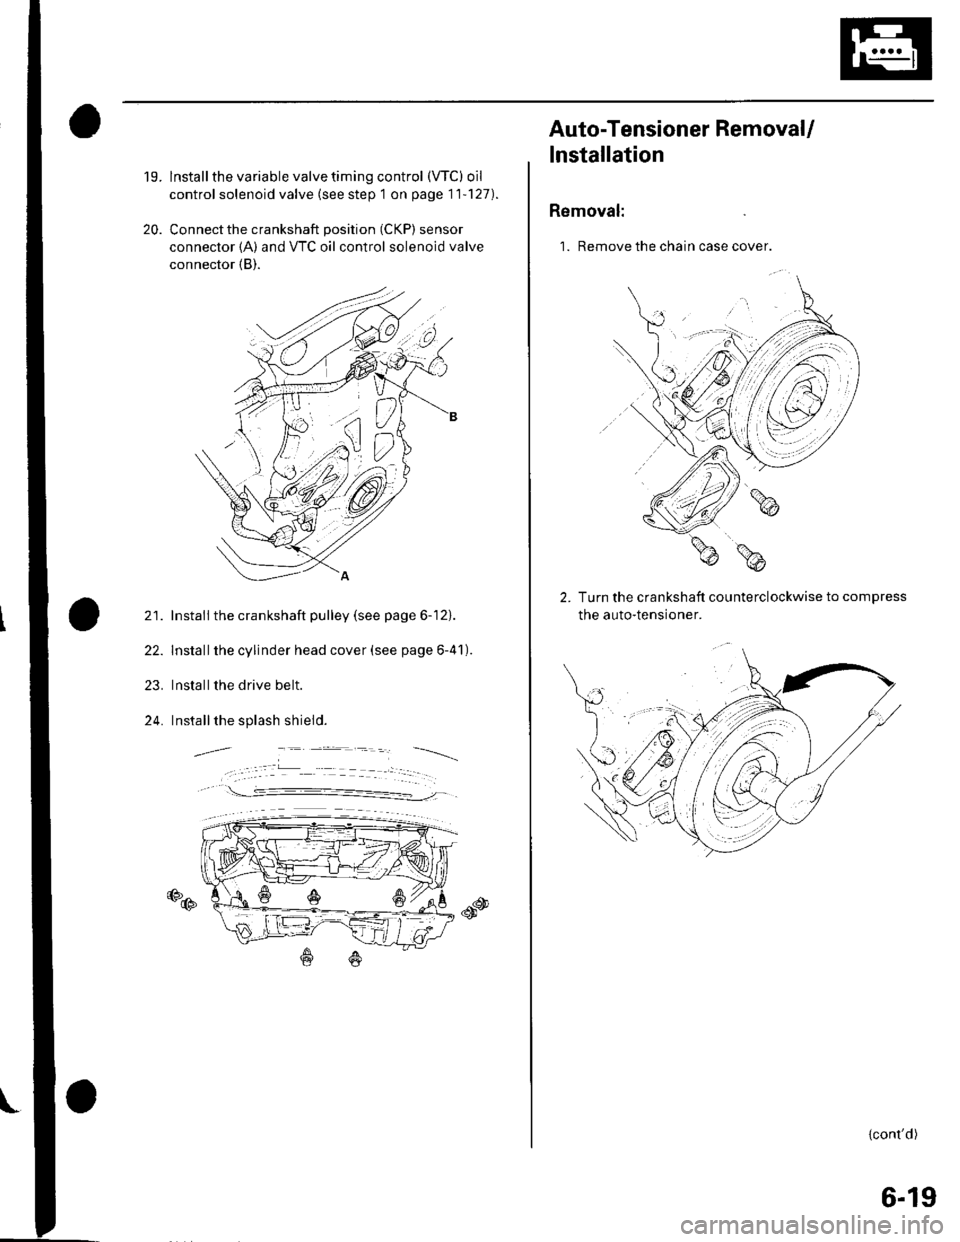 HONDA CIVIC 2003 7.G Workshop Manual 19.
20.
lnstall the variable valve timing control (VTC) oil
control solenoid valve (see step 1 on page 11127).
Connect the crankshaft position (CKP) sensor
connector {A) and VTC oil control solenoid 